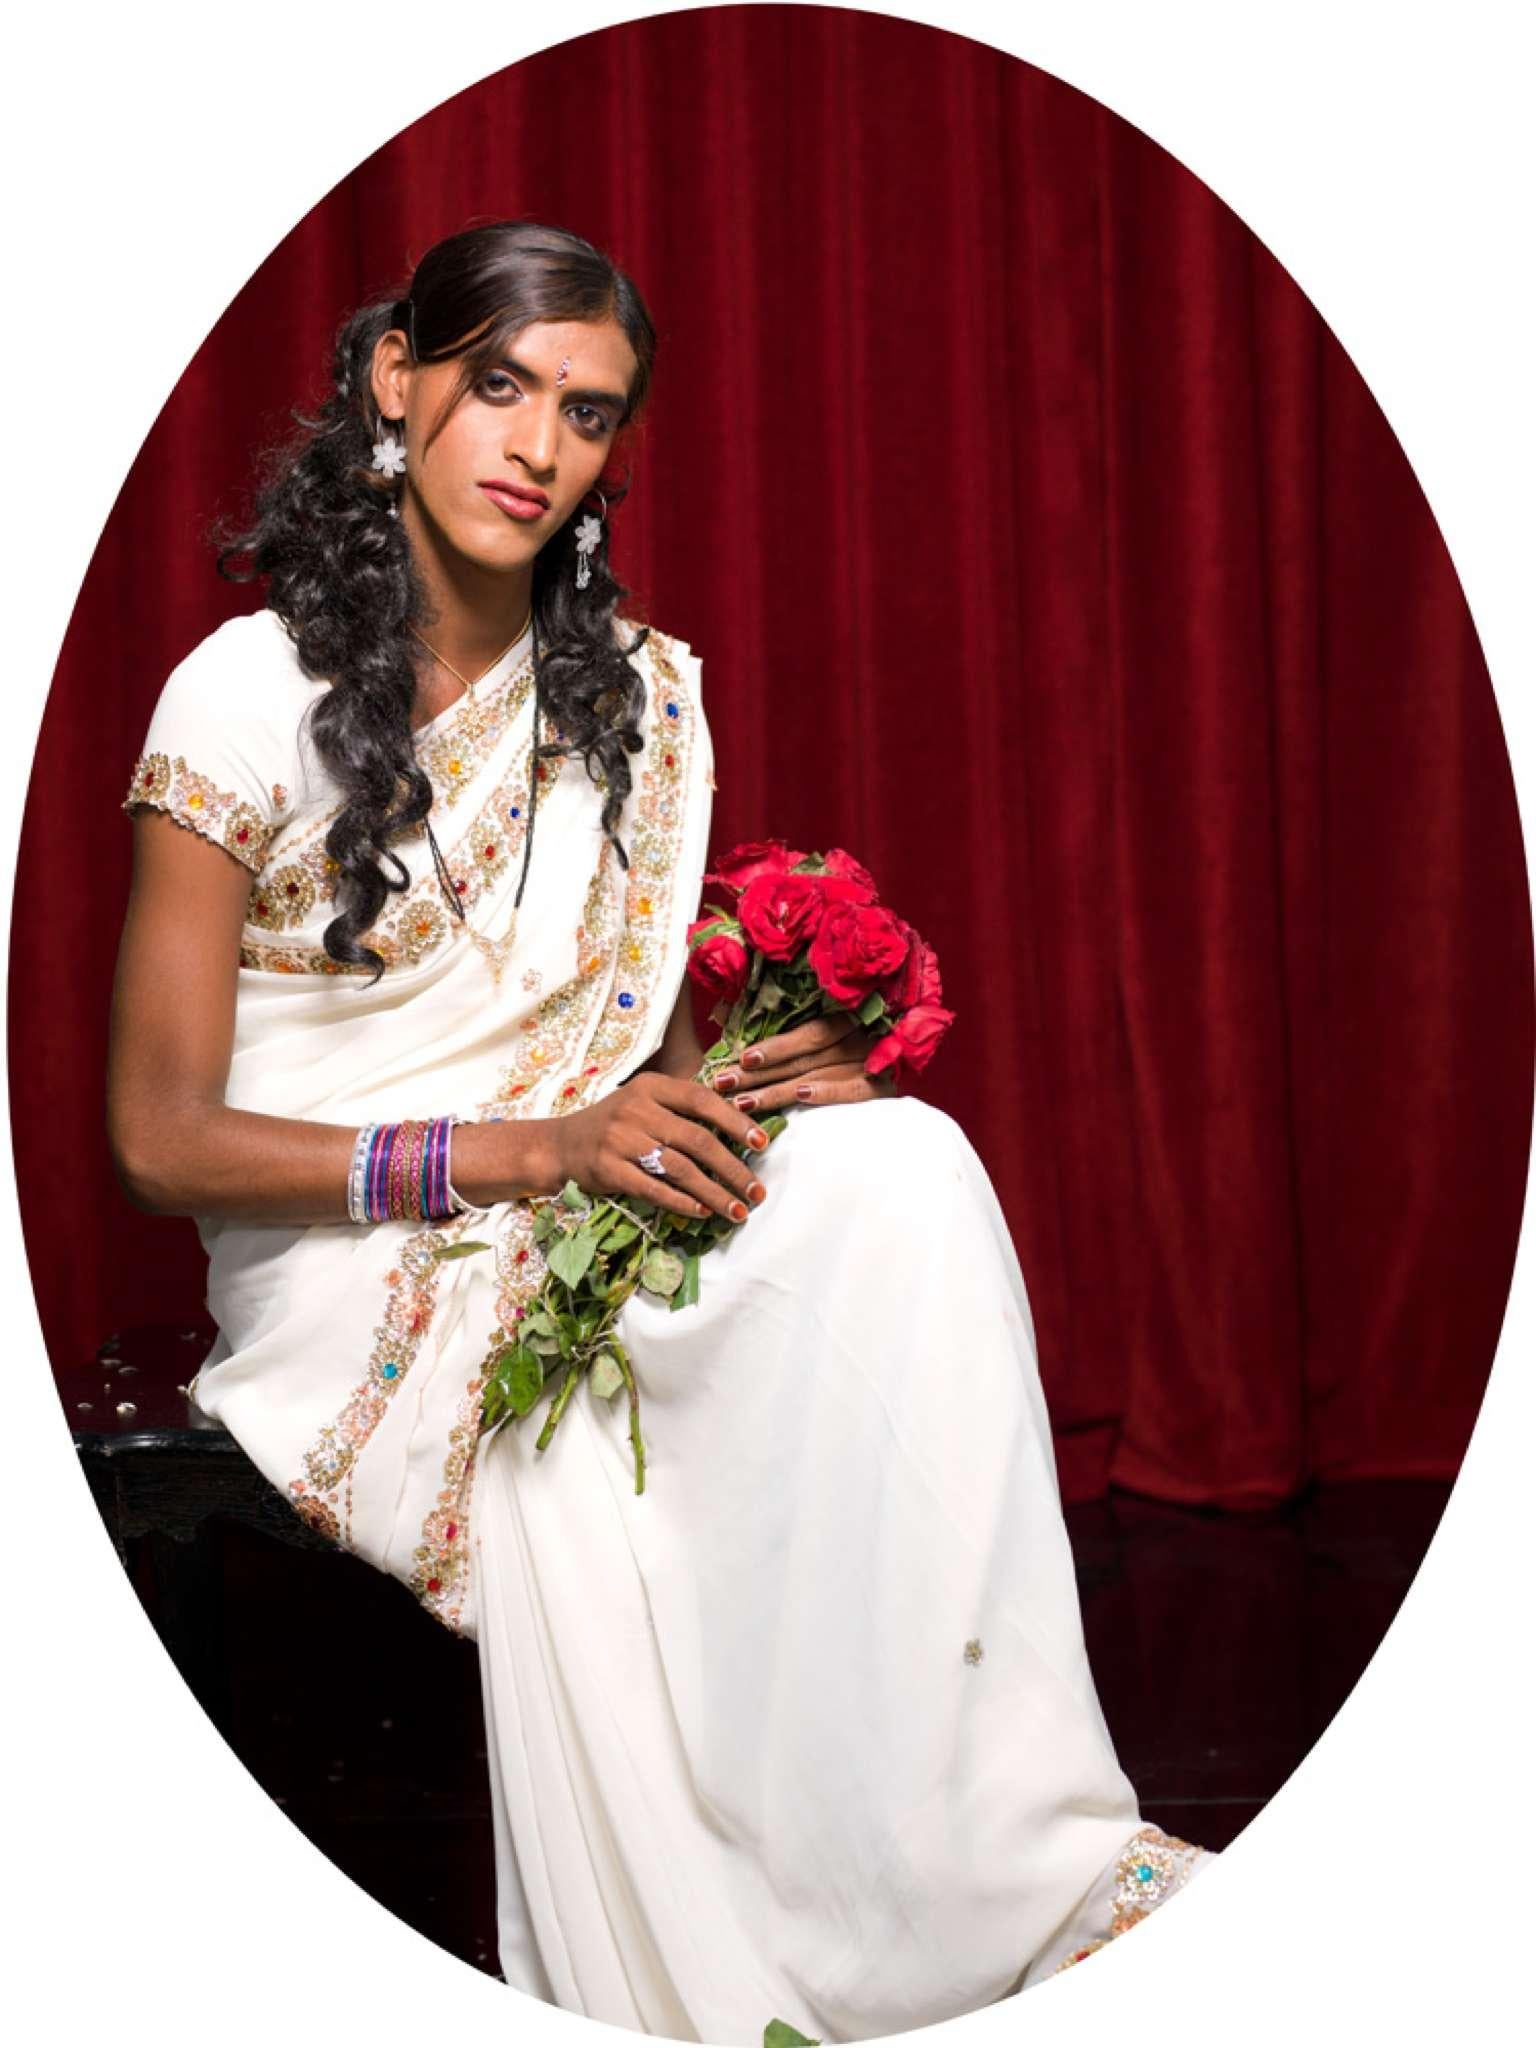 Muskan and Sangita, Protraits. From The Third Gender of India Series - Photograph by Jill Peters